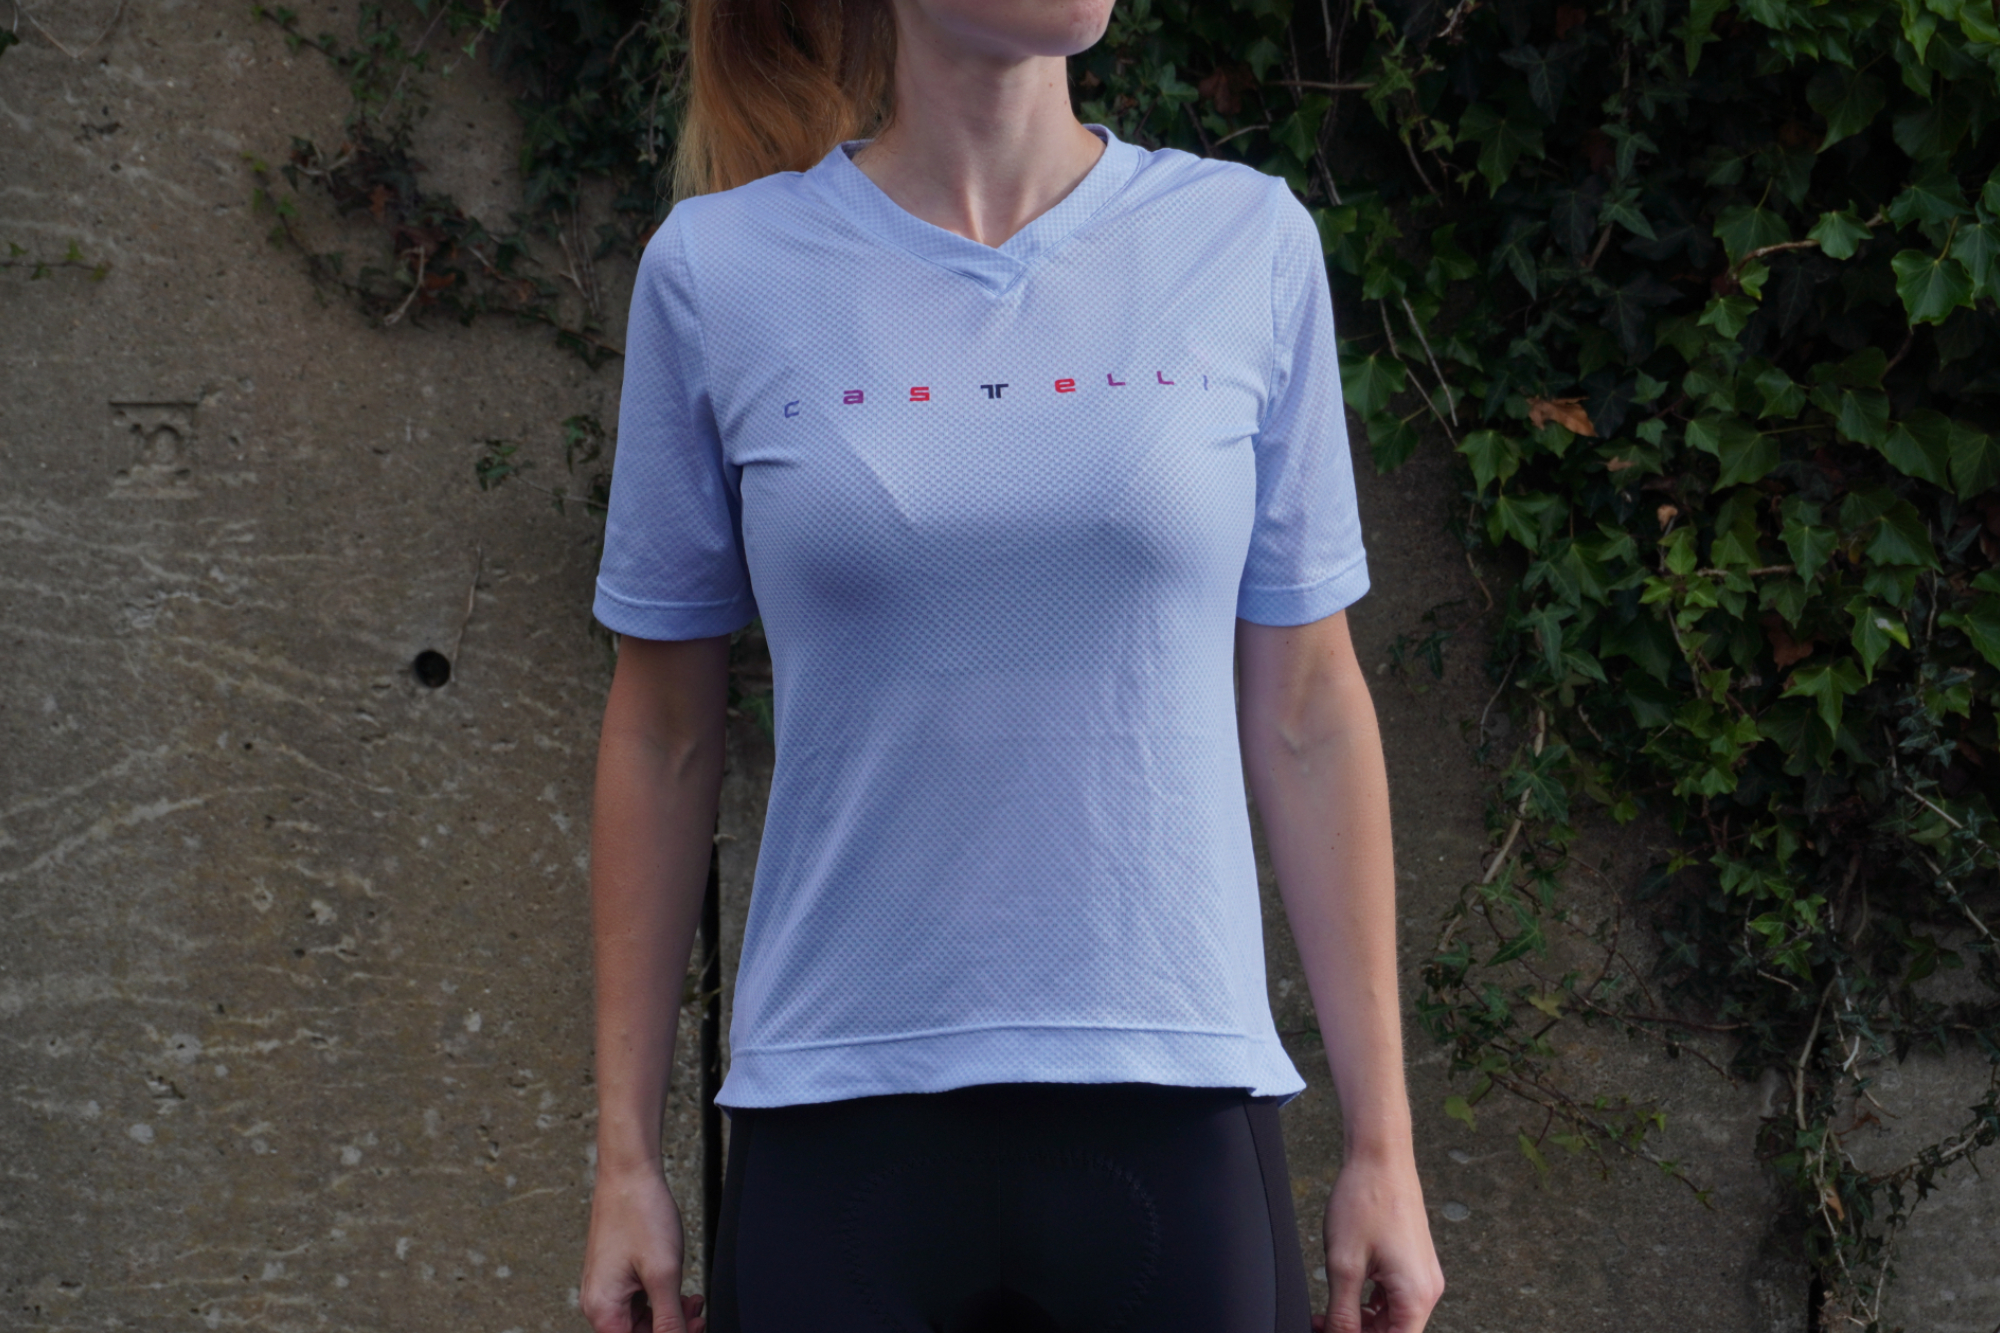 Anna Abram wearing the Castelli Trail Tech 2 W Tee, which is among the best women's gravel cycling clothing